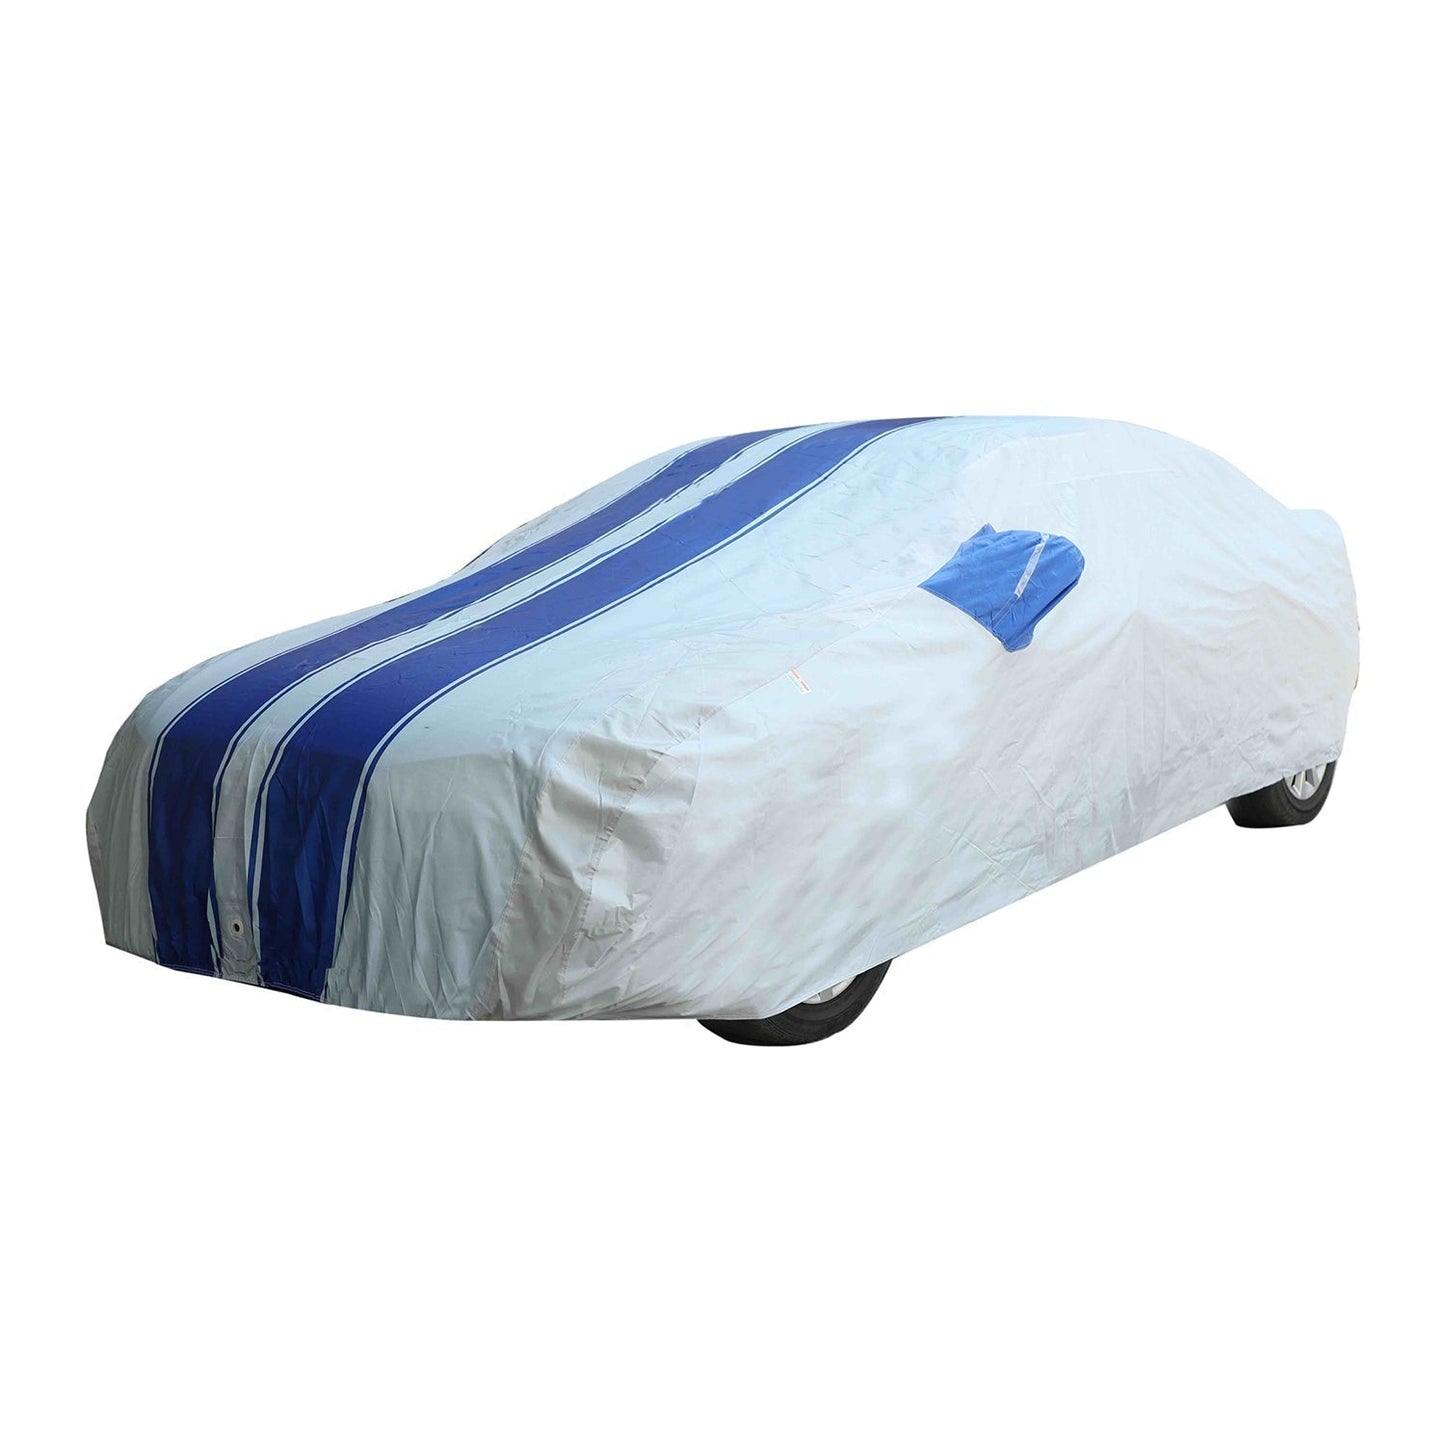 Oshotto 100% Blue dustproof and Water Resistant Car Body Cover with Mirror Pockets For Nissan Micra